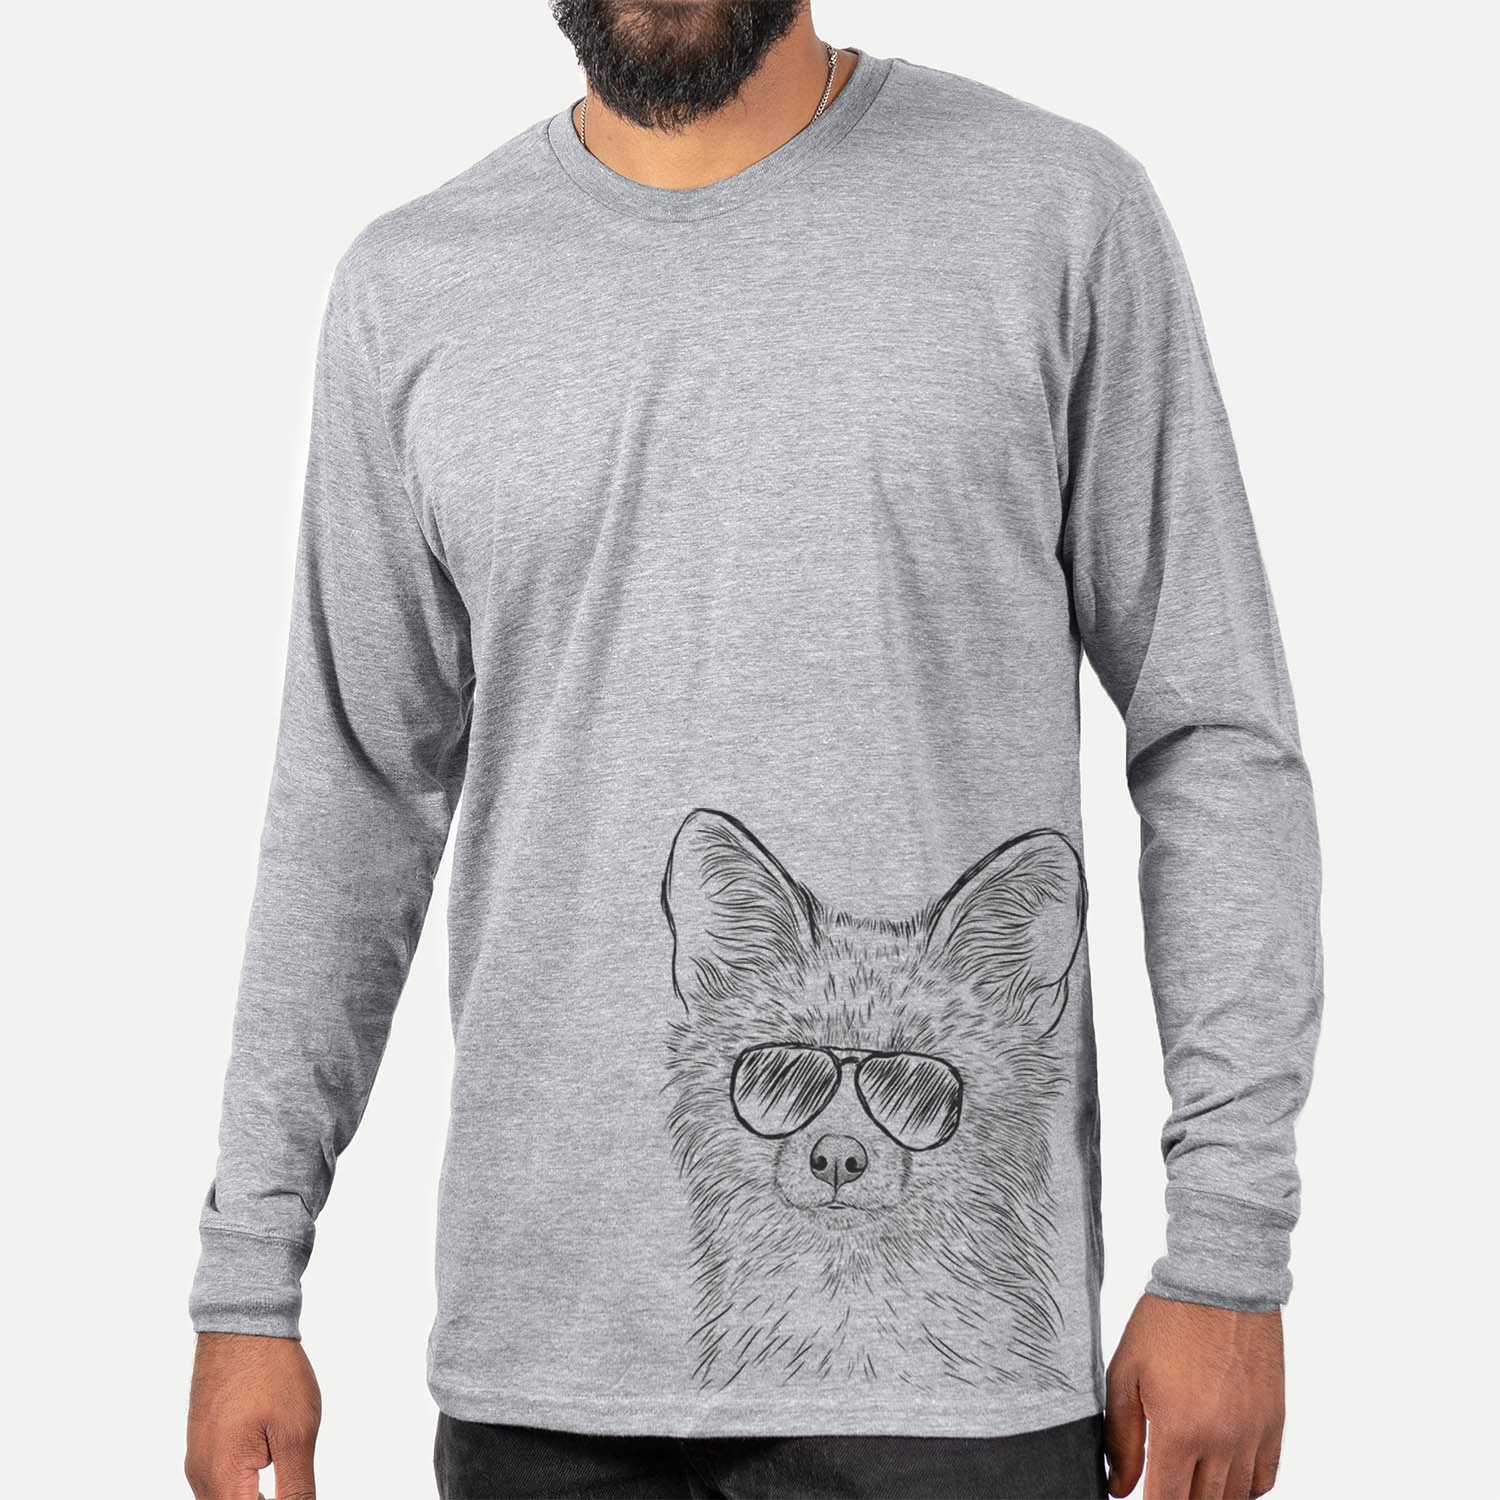 Drax The Red Fox - Long Sleeve Tri-Blend Unisex Crew Shirt Grey Lover Gift